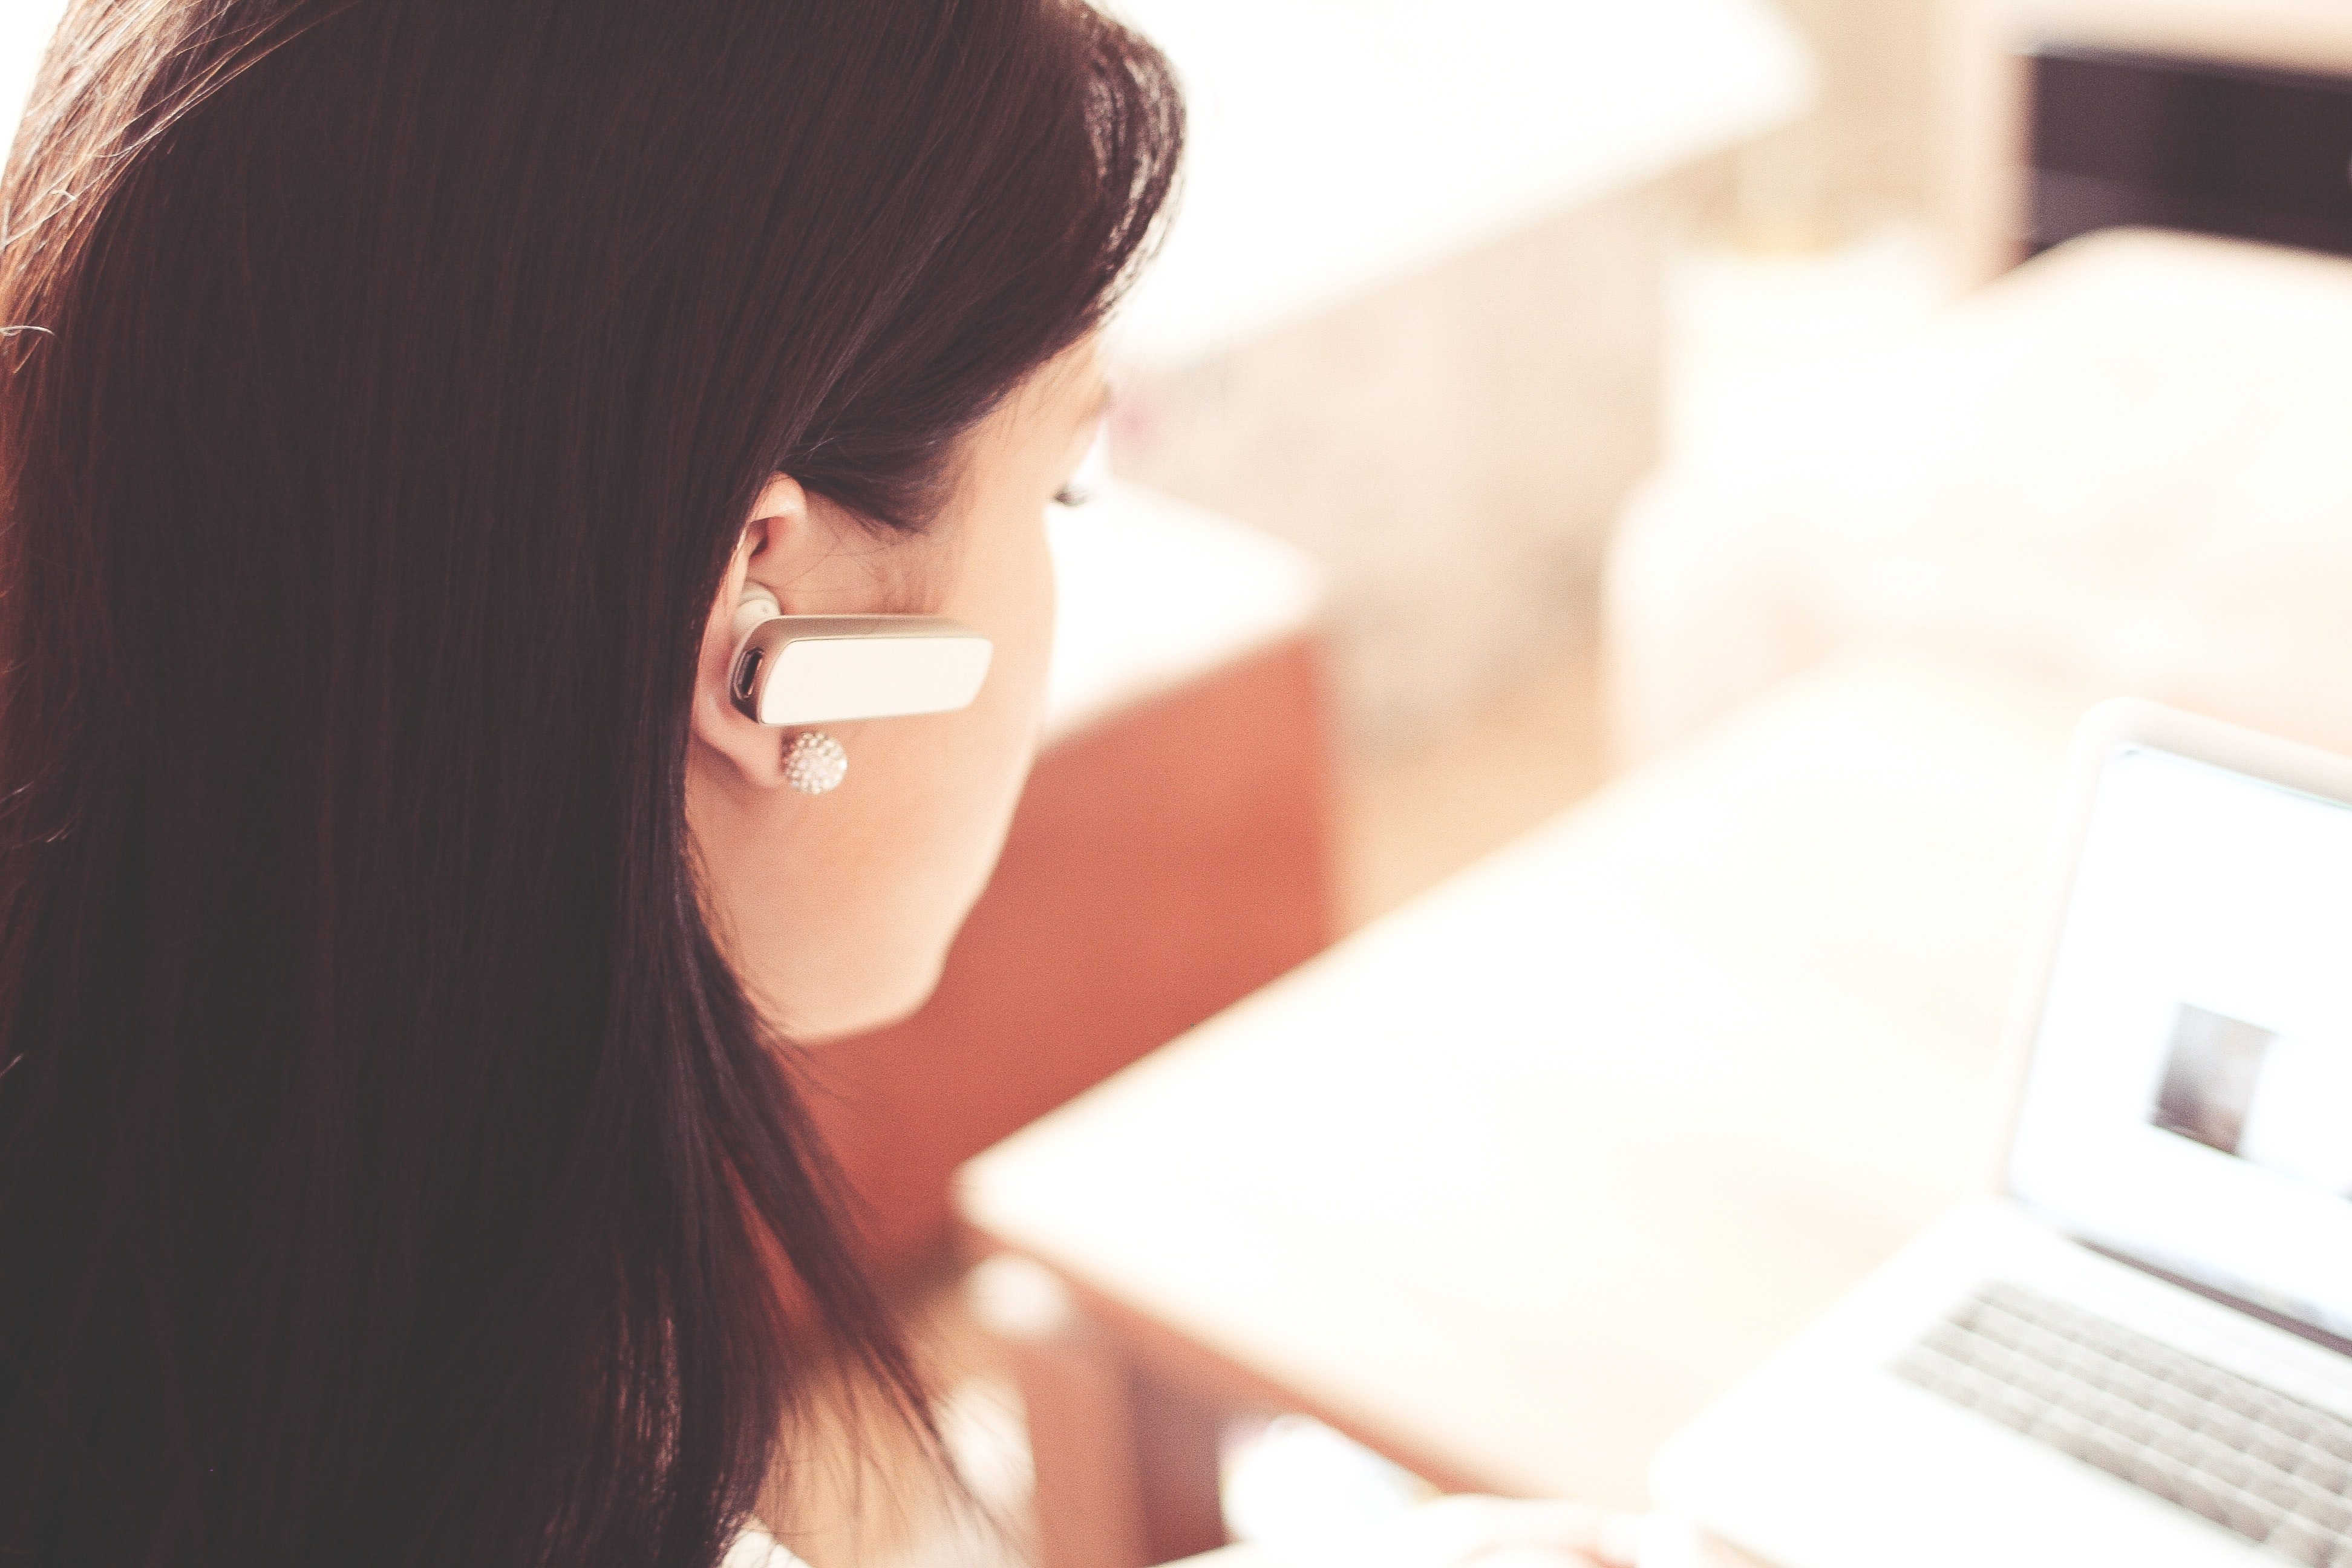 How to improve customer service using a mobile app